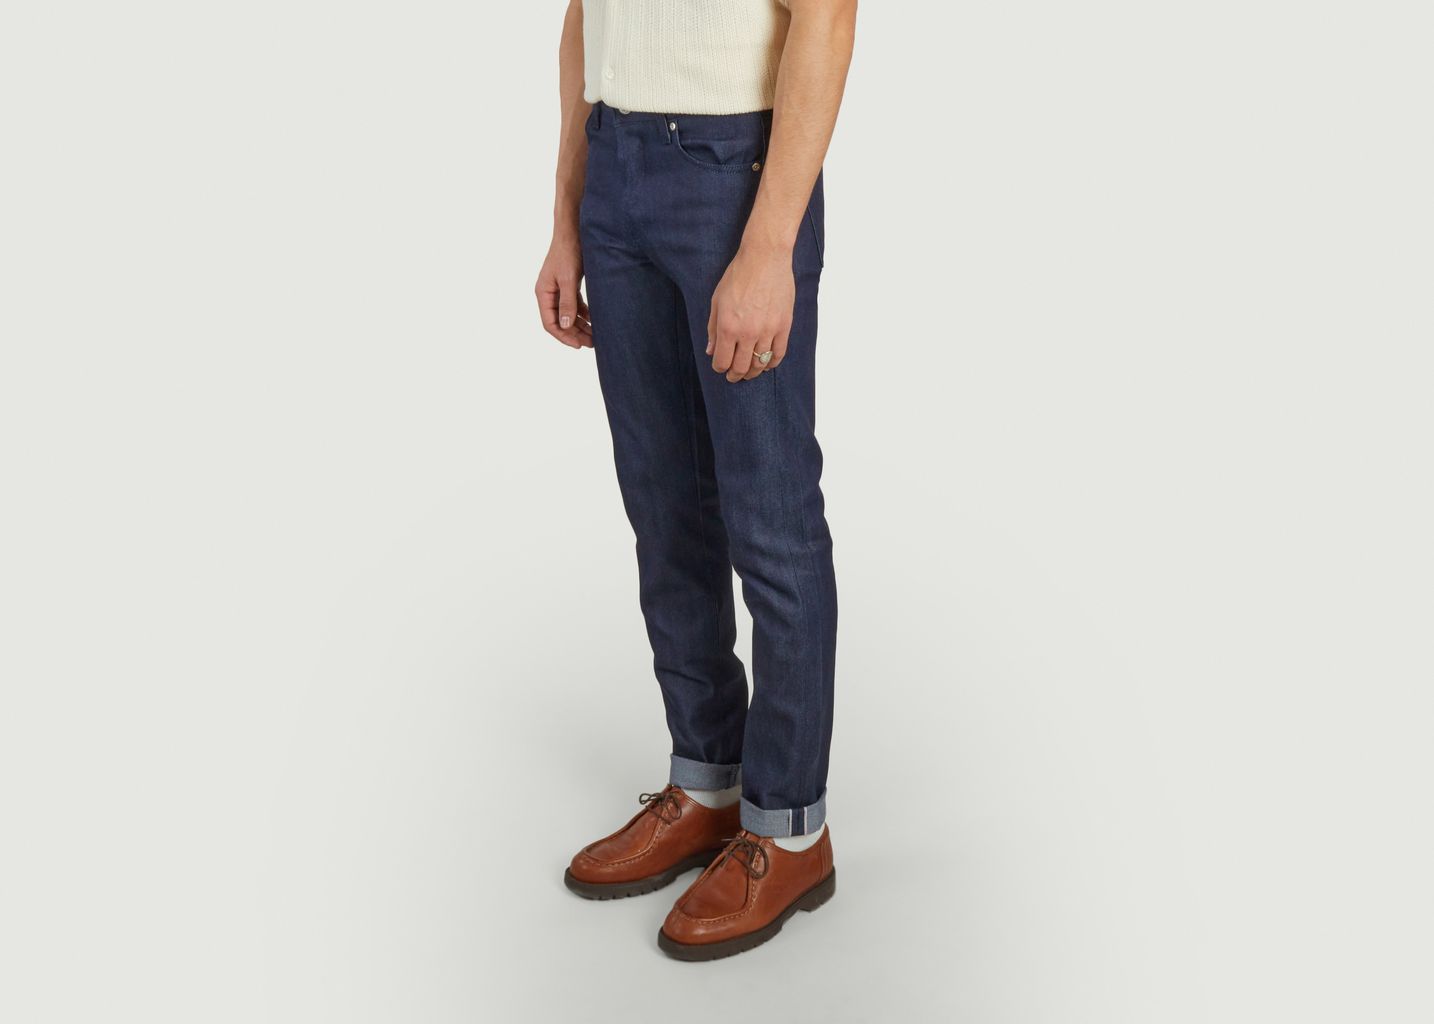 Jean Super Guy Spring Garden Selvedge - Naked and Famous